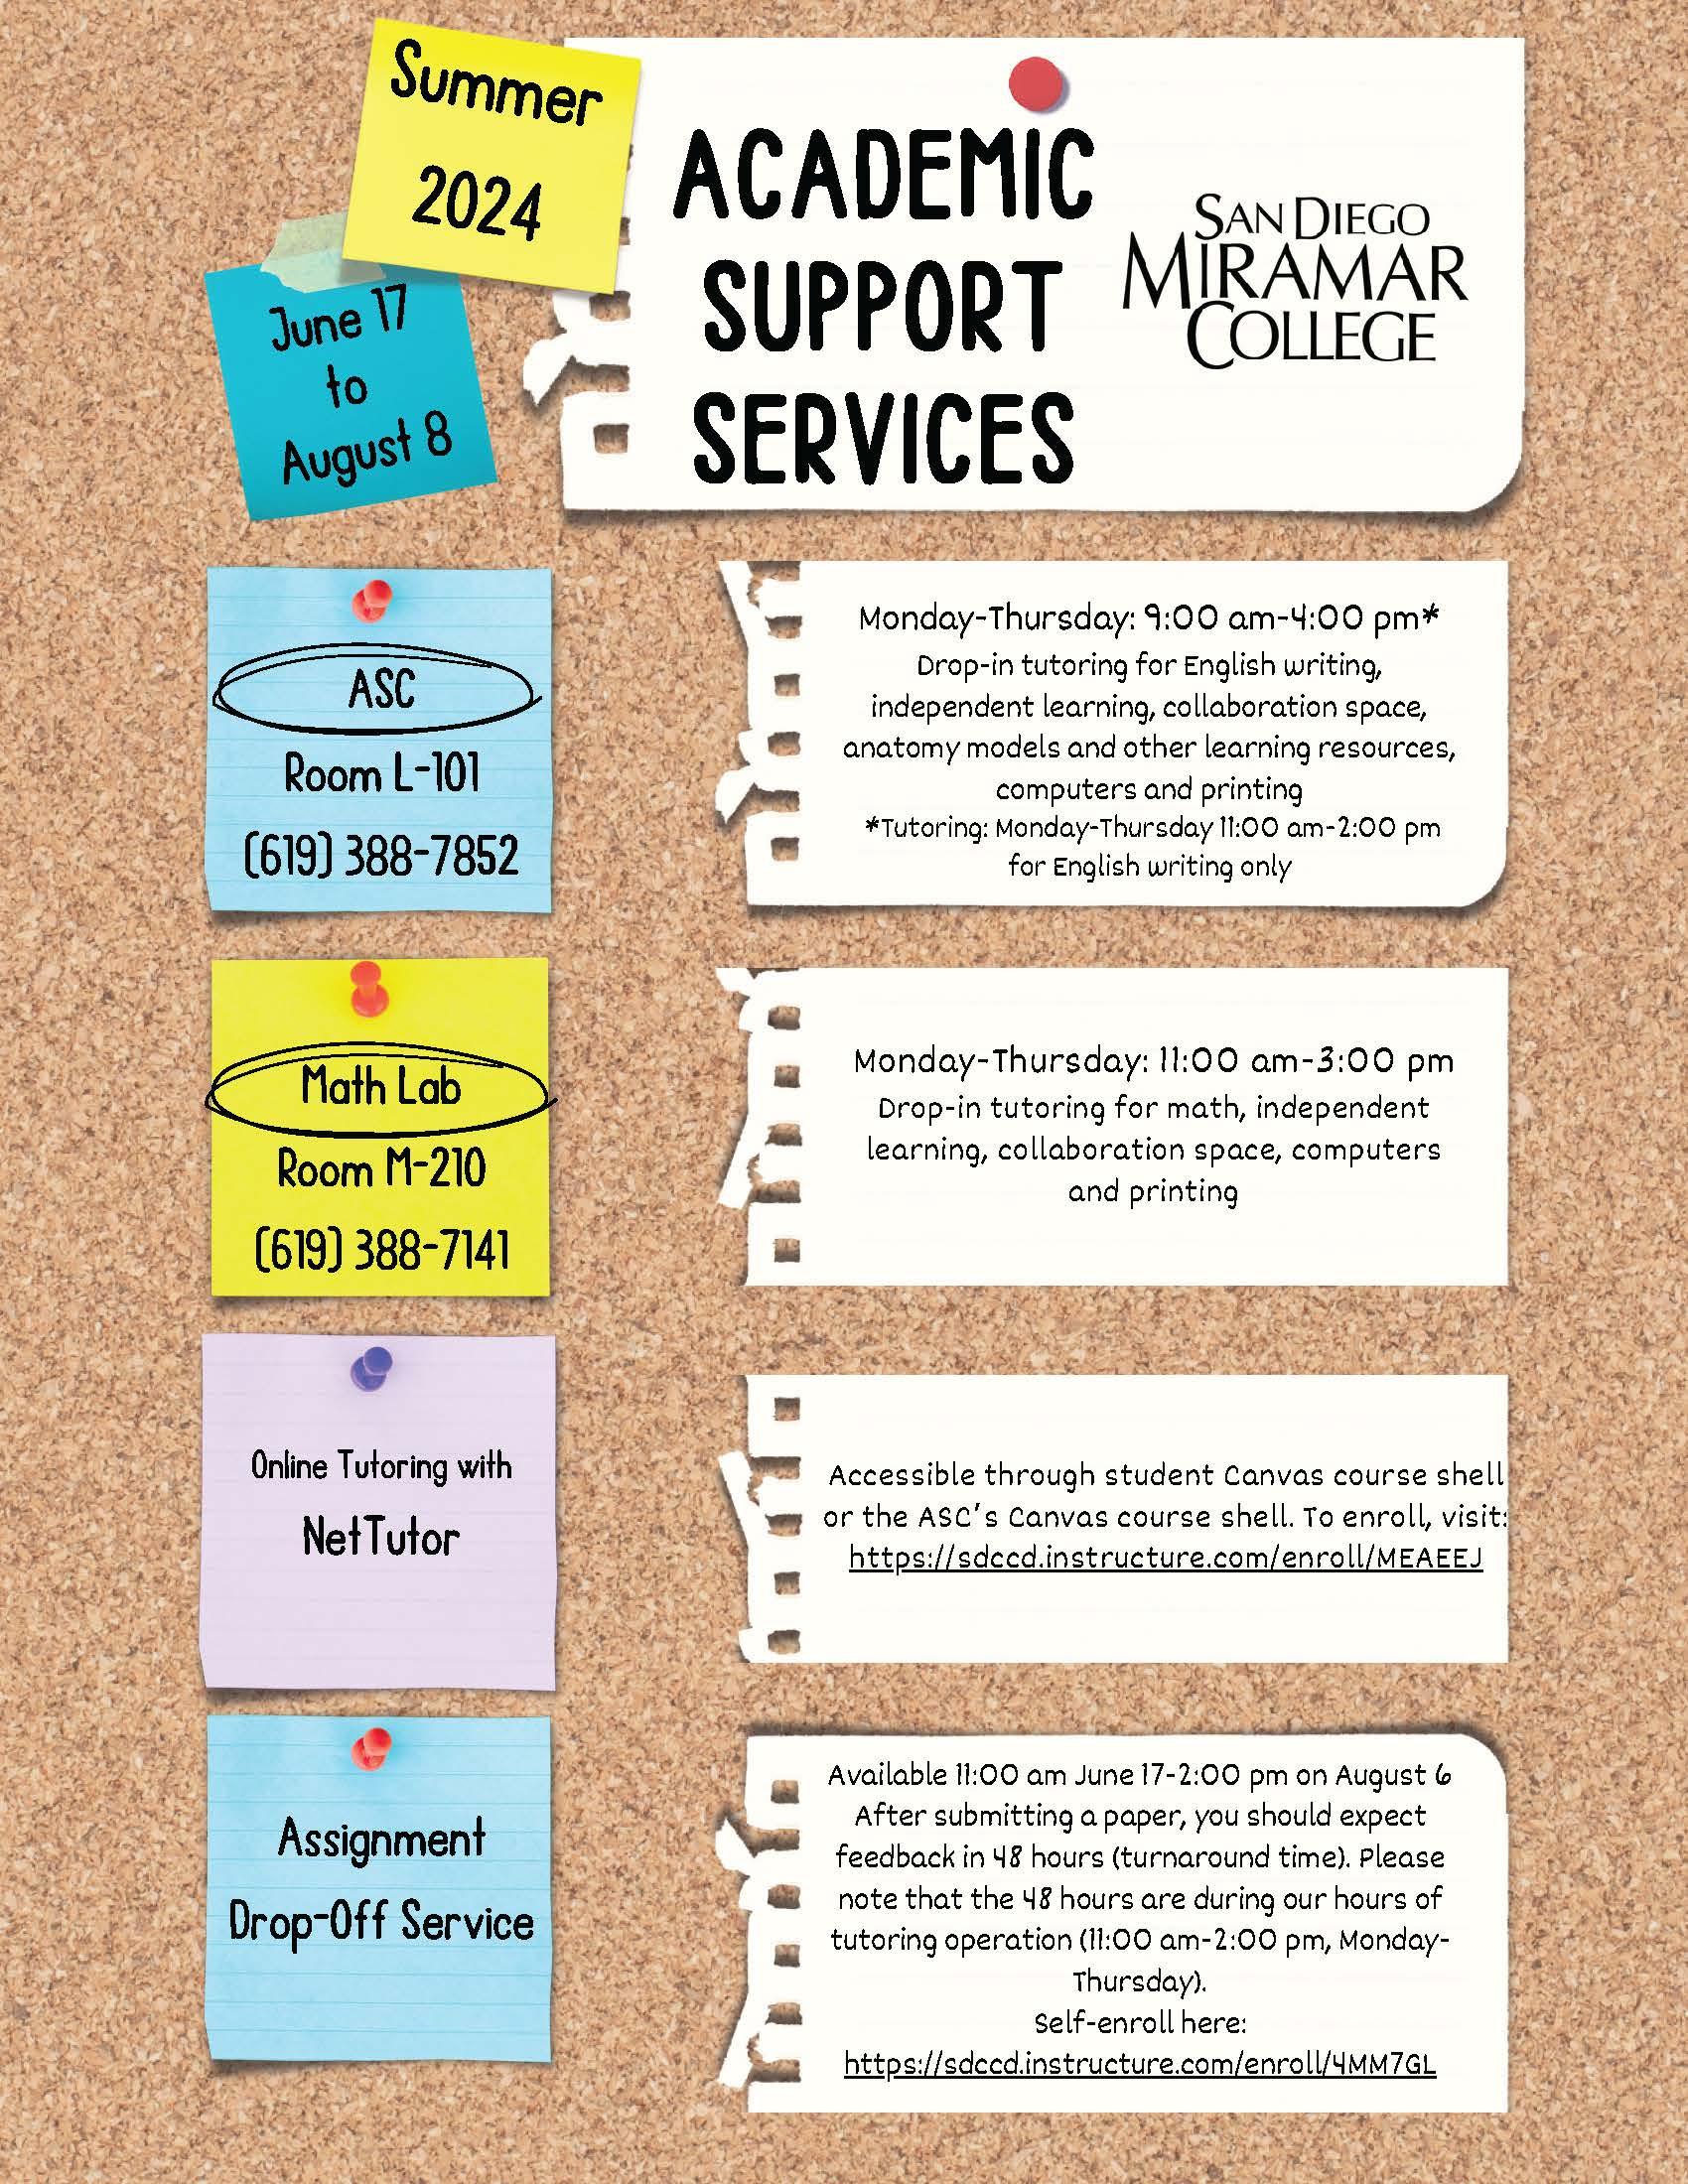 Summer 2024 Academic Support Services